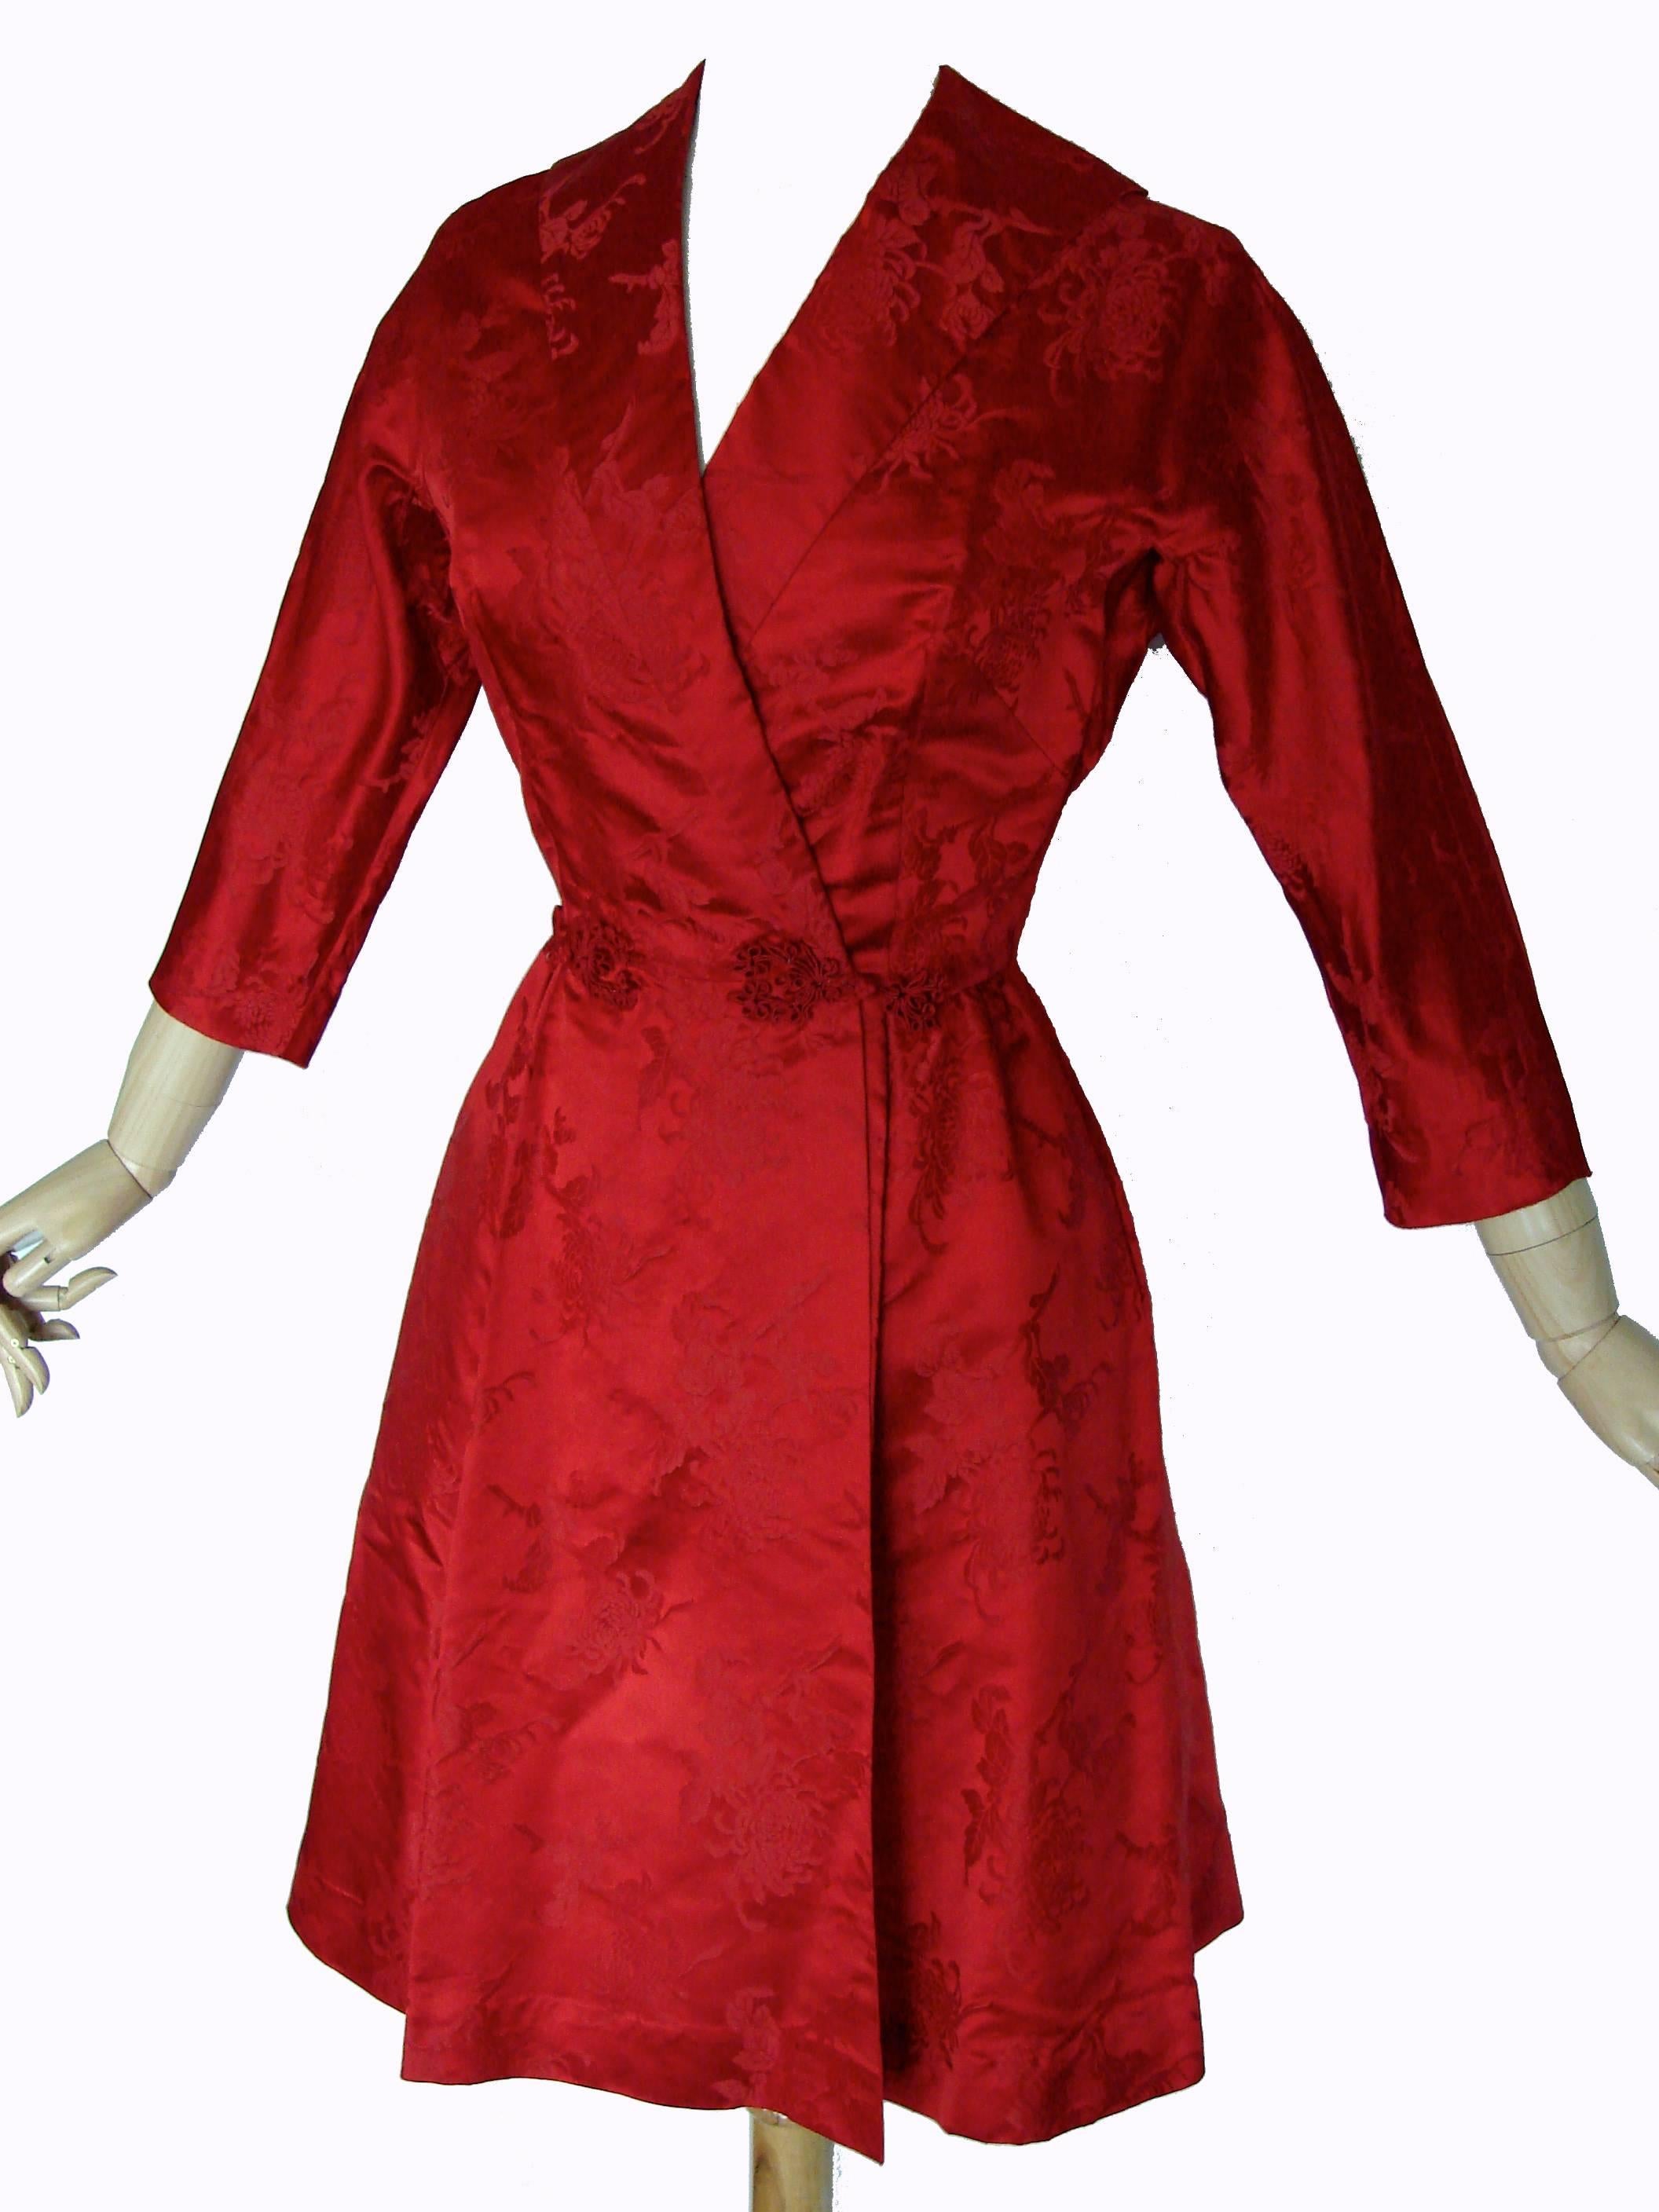 Here's a vibrant red dress from Dynasty for Lord & Taylor.  Estimated at an early 1960s production, it features Dolman sleeves, a fitted waist and flared skirt.  Fastens wrap style with silk knot buttons.  In very good condition for its age, we note